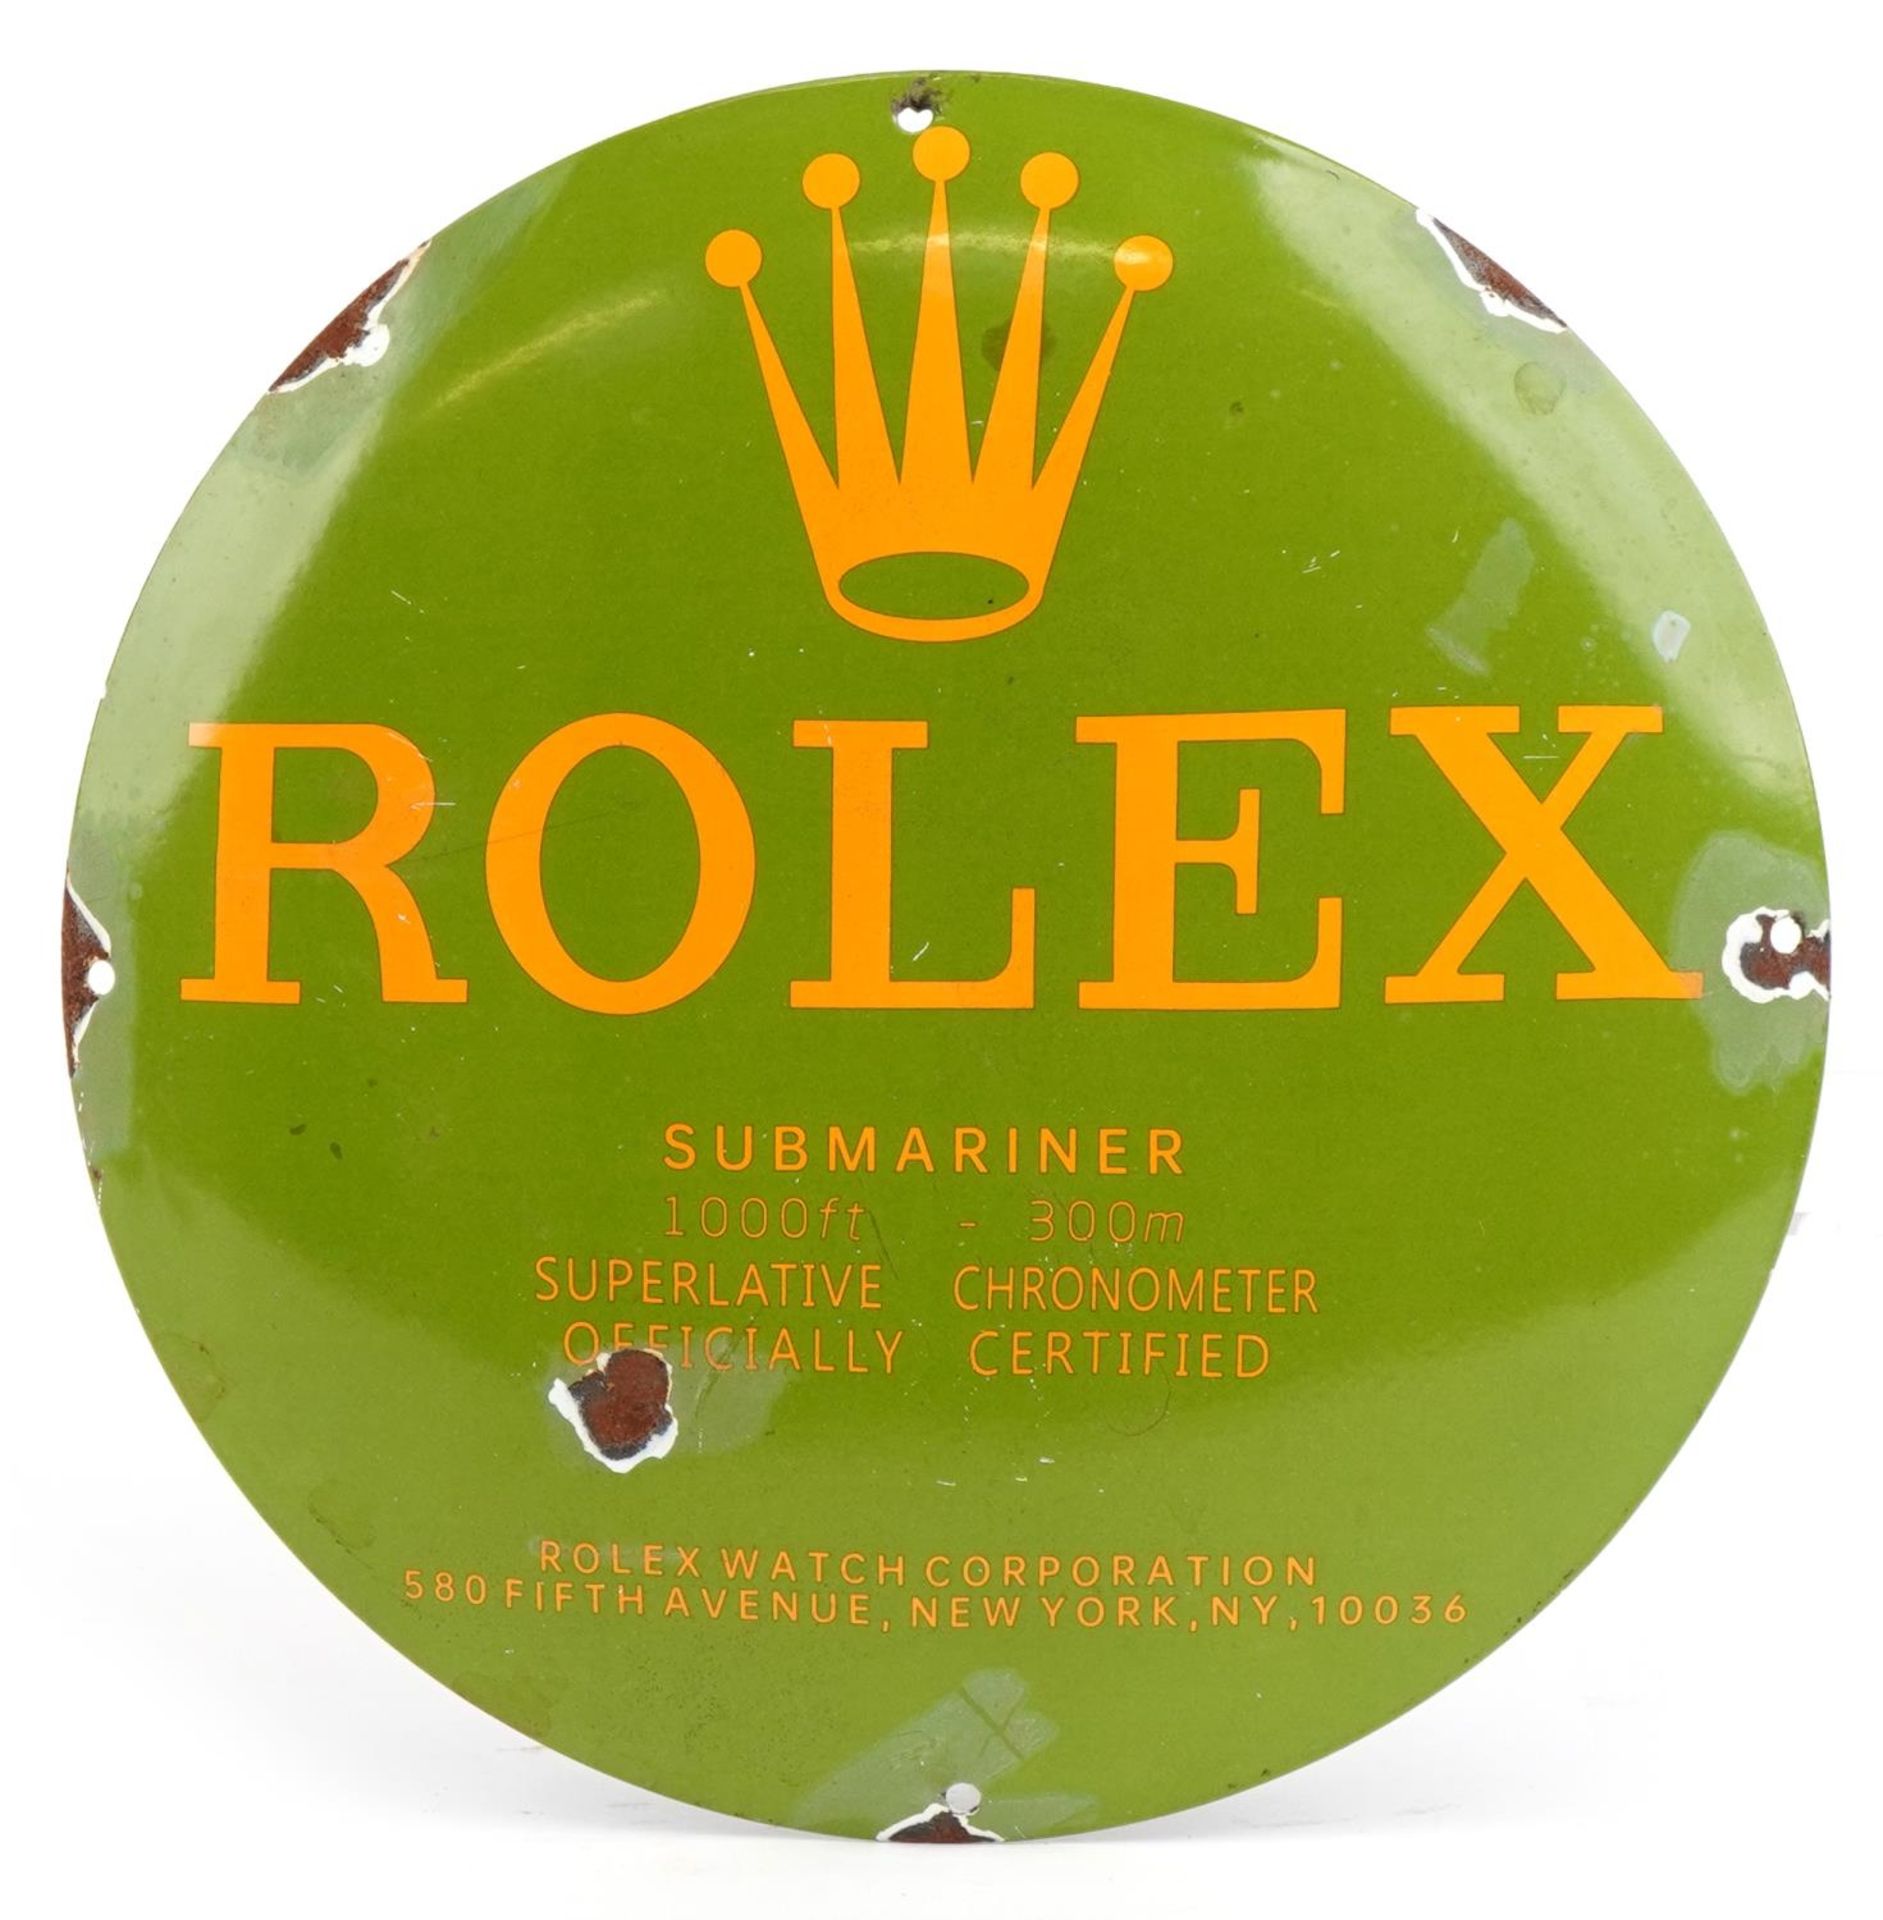 Rolex Submariner convex enamel advertising sign, 29.5cm in diameter : For further information on